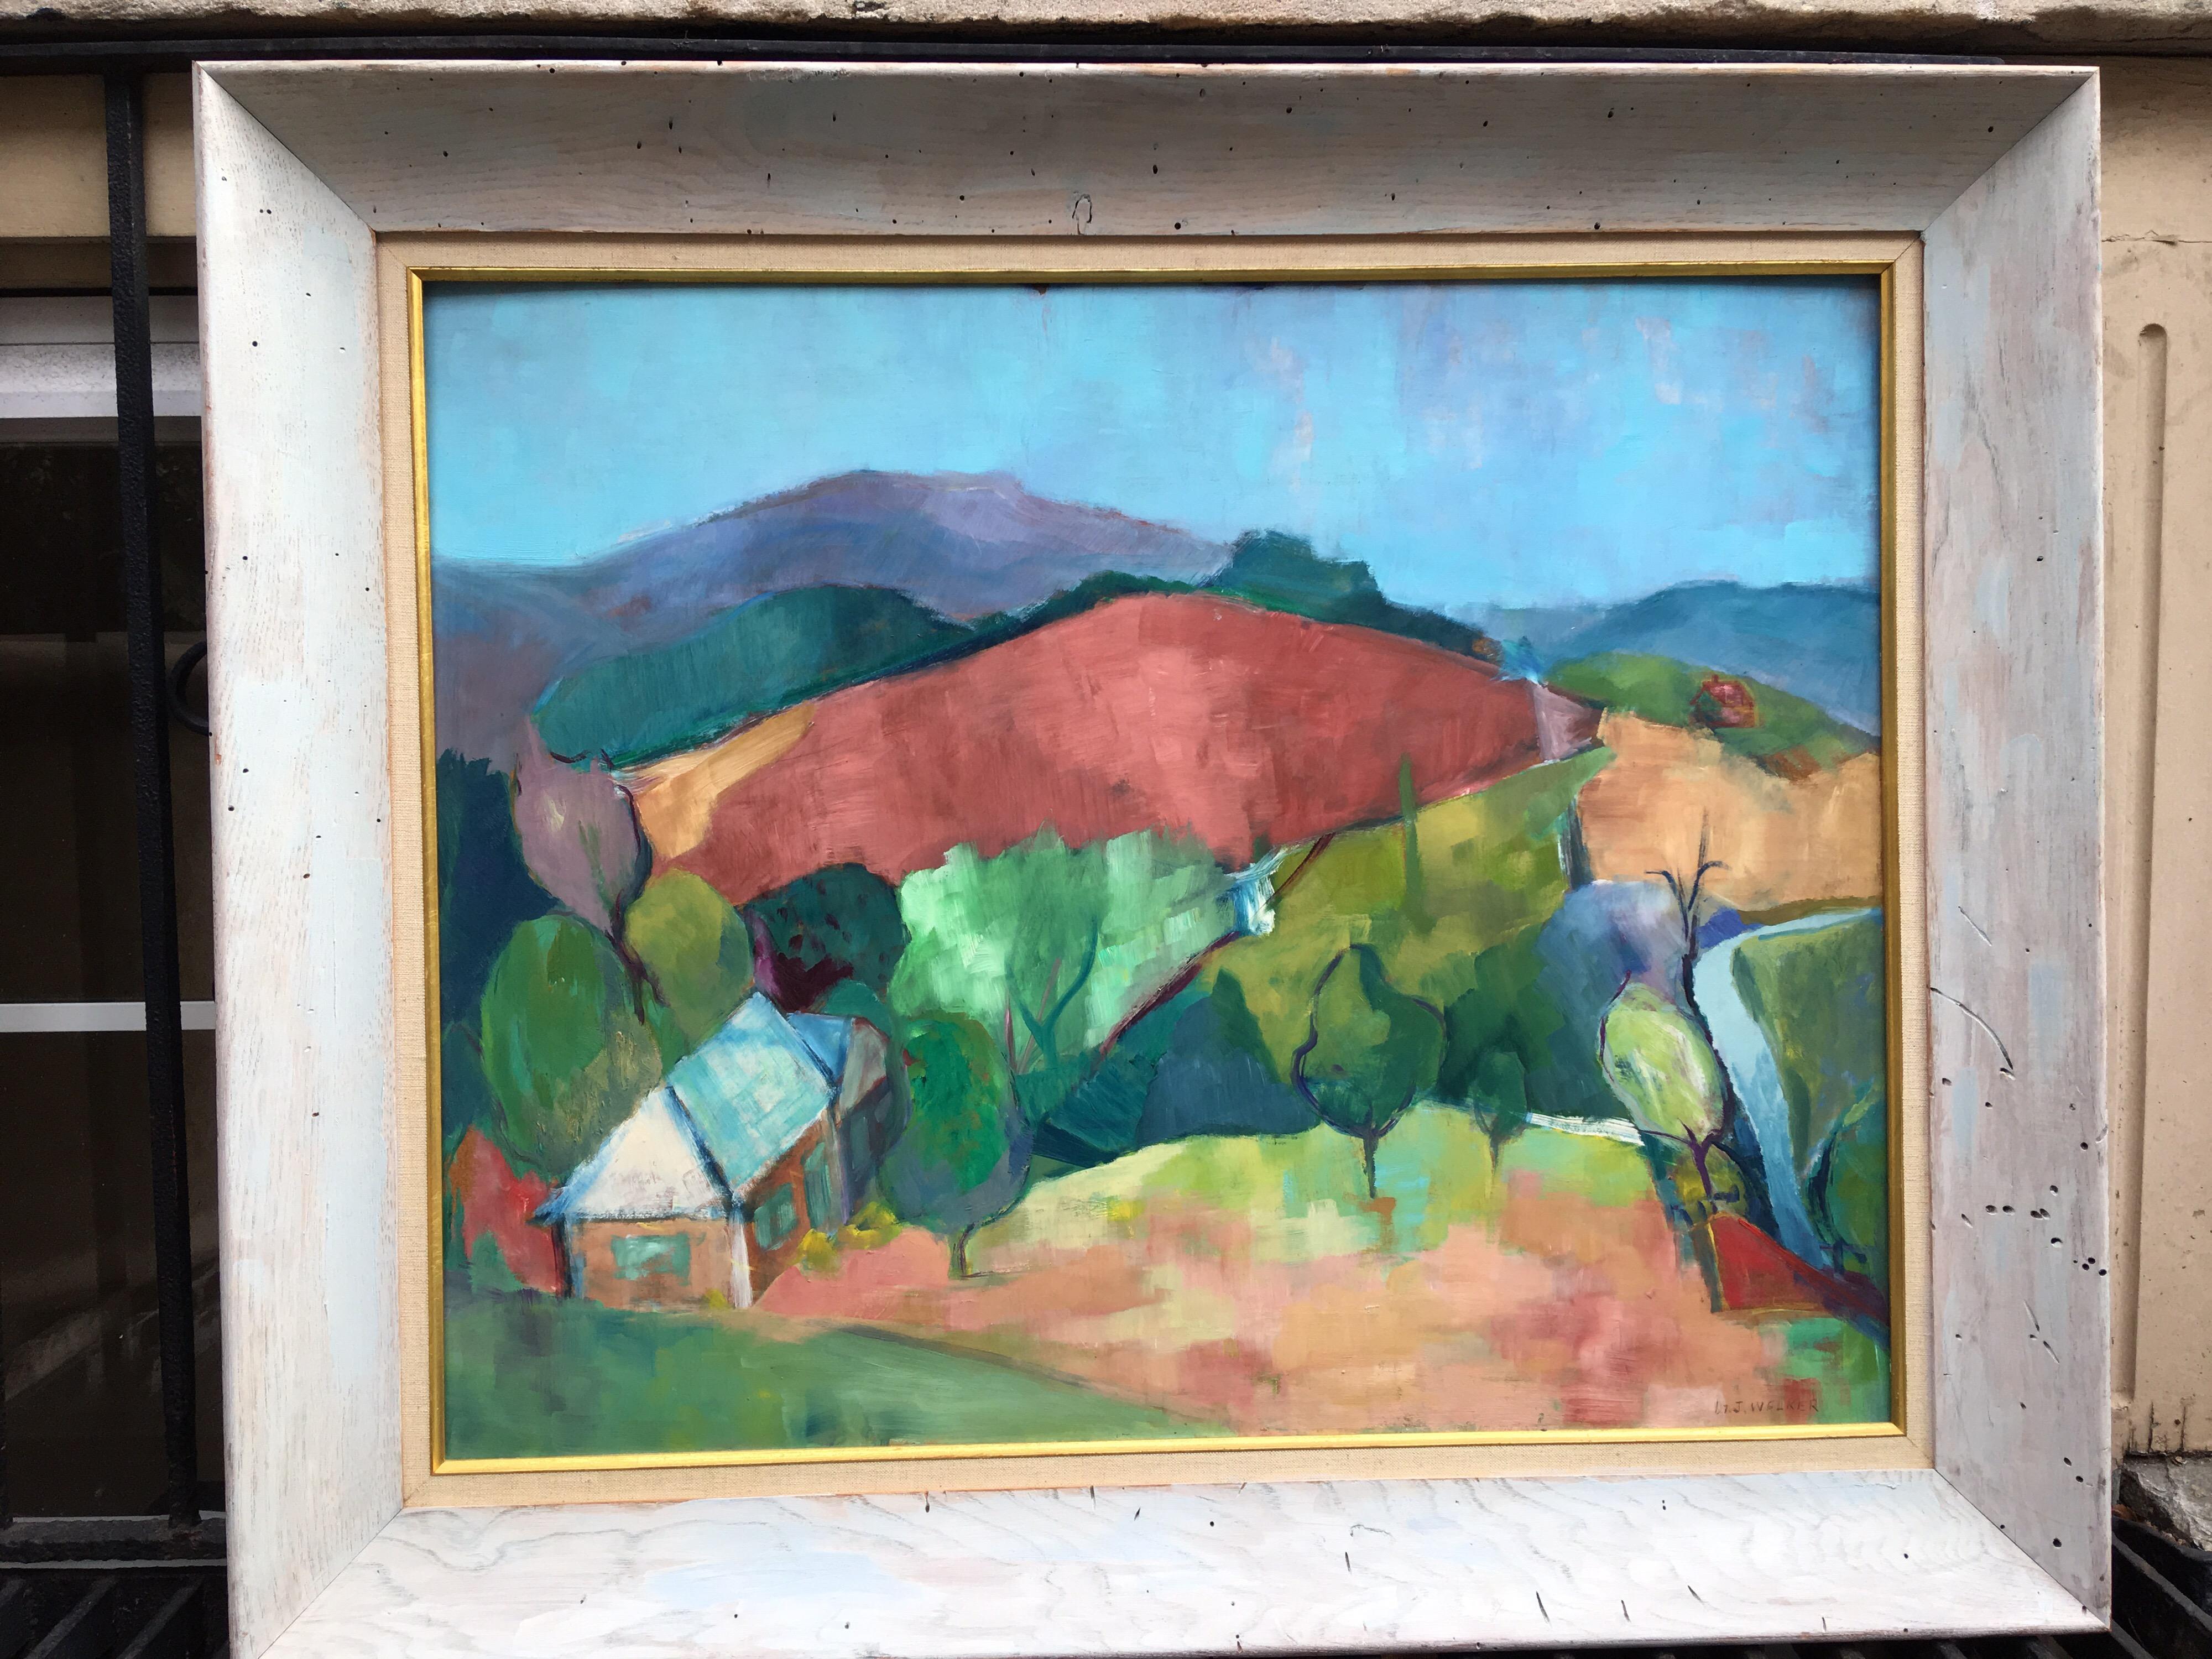 J Welker oil on board landscape in blues, orange and greens. Signed bottom right, probably from the early 1960s, New Jersey artist. Measurement without frame of board is 29